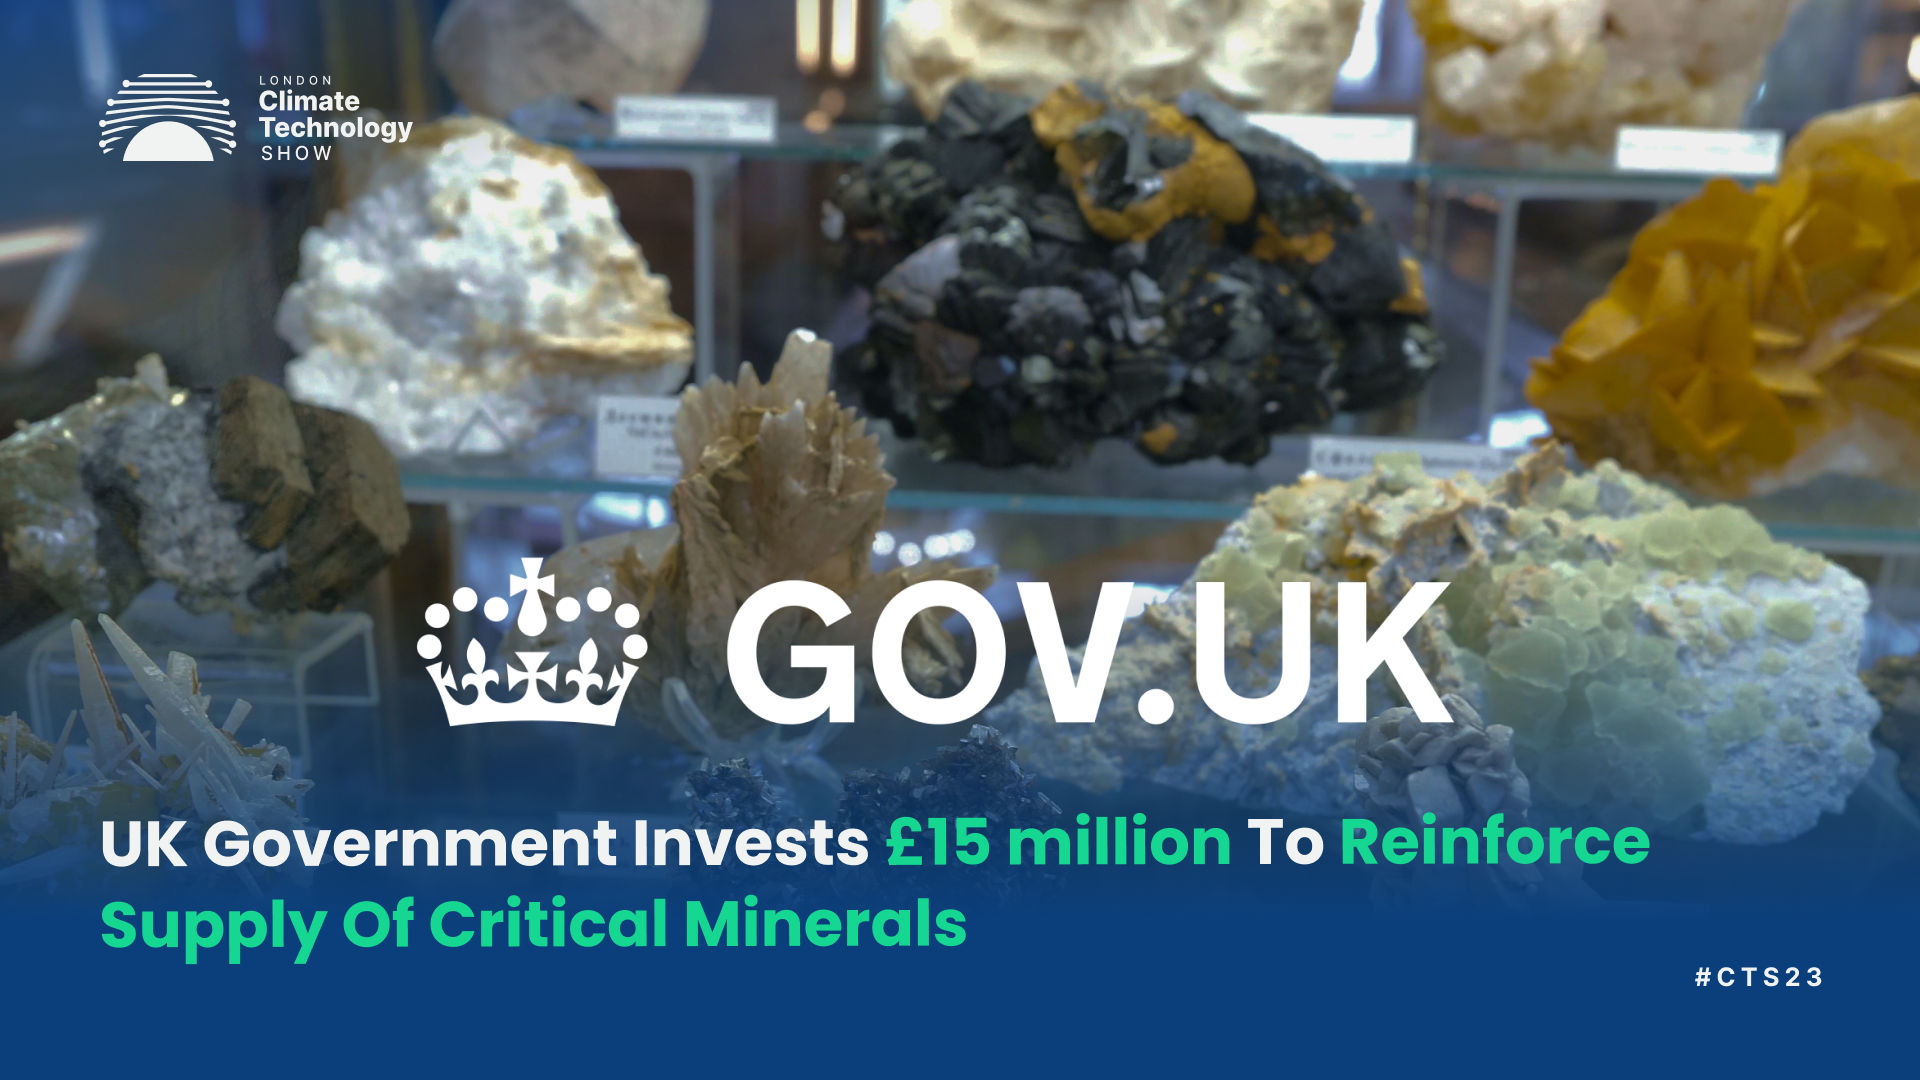 UK Government Invests £15 million To Reinforce Supply Of Critical Minerals